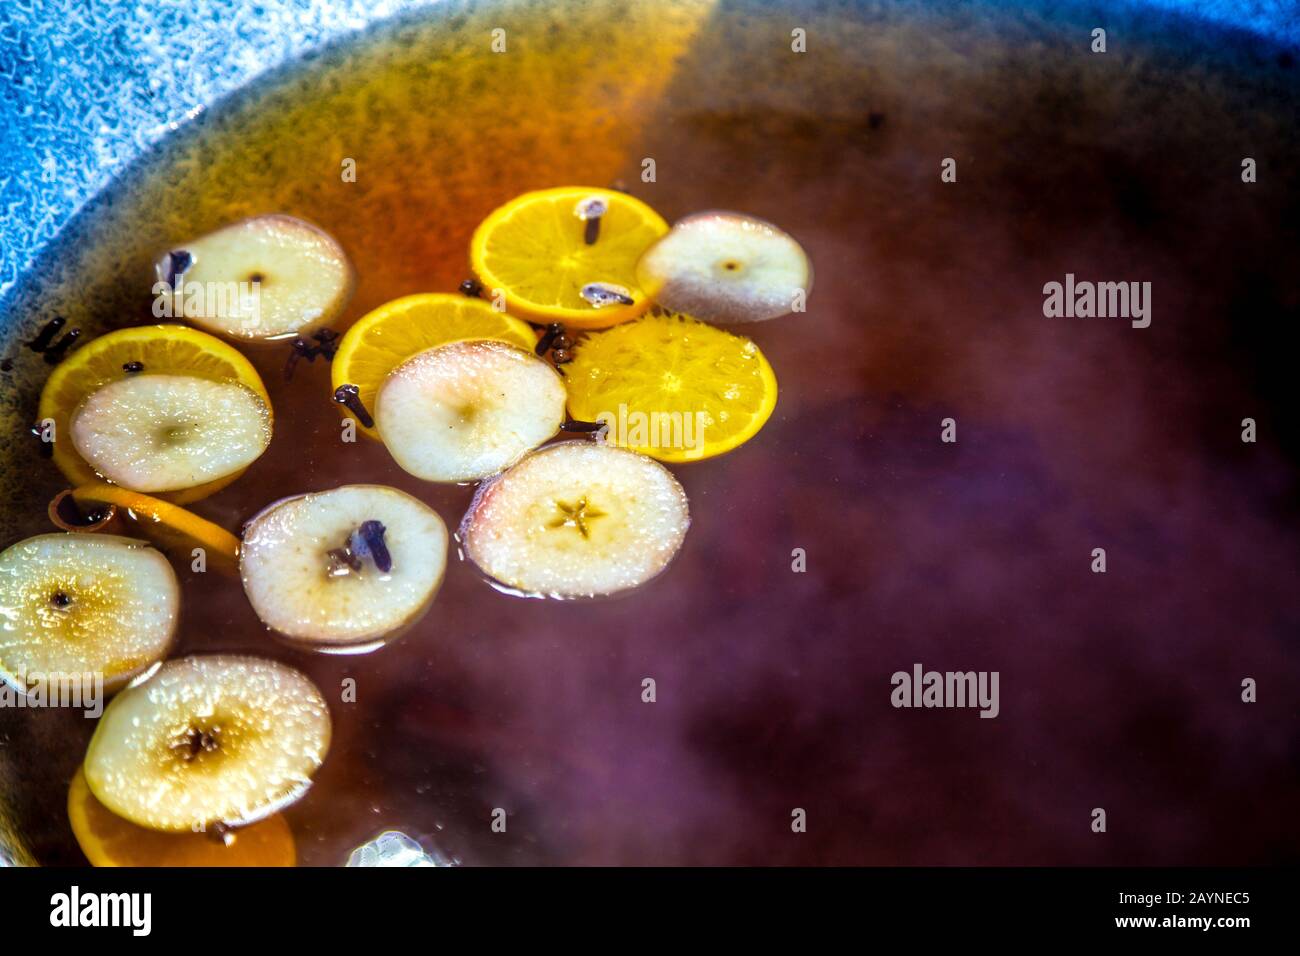 Mulled white wine with apple and orange slices and cloves at Szabadsag Square Market, Budapest, Hungary Stock Photo